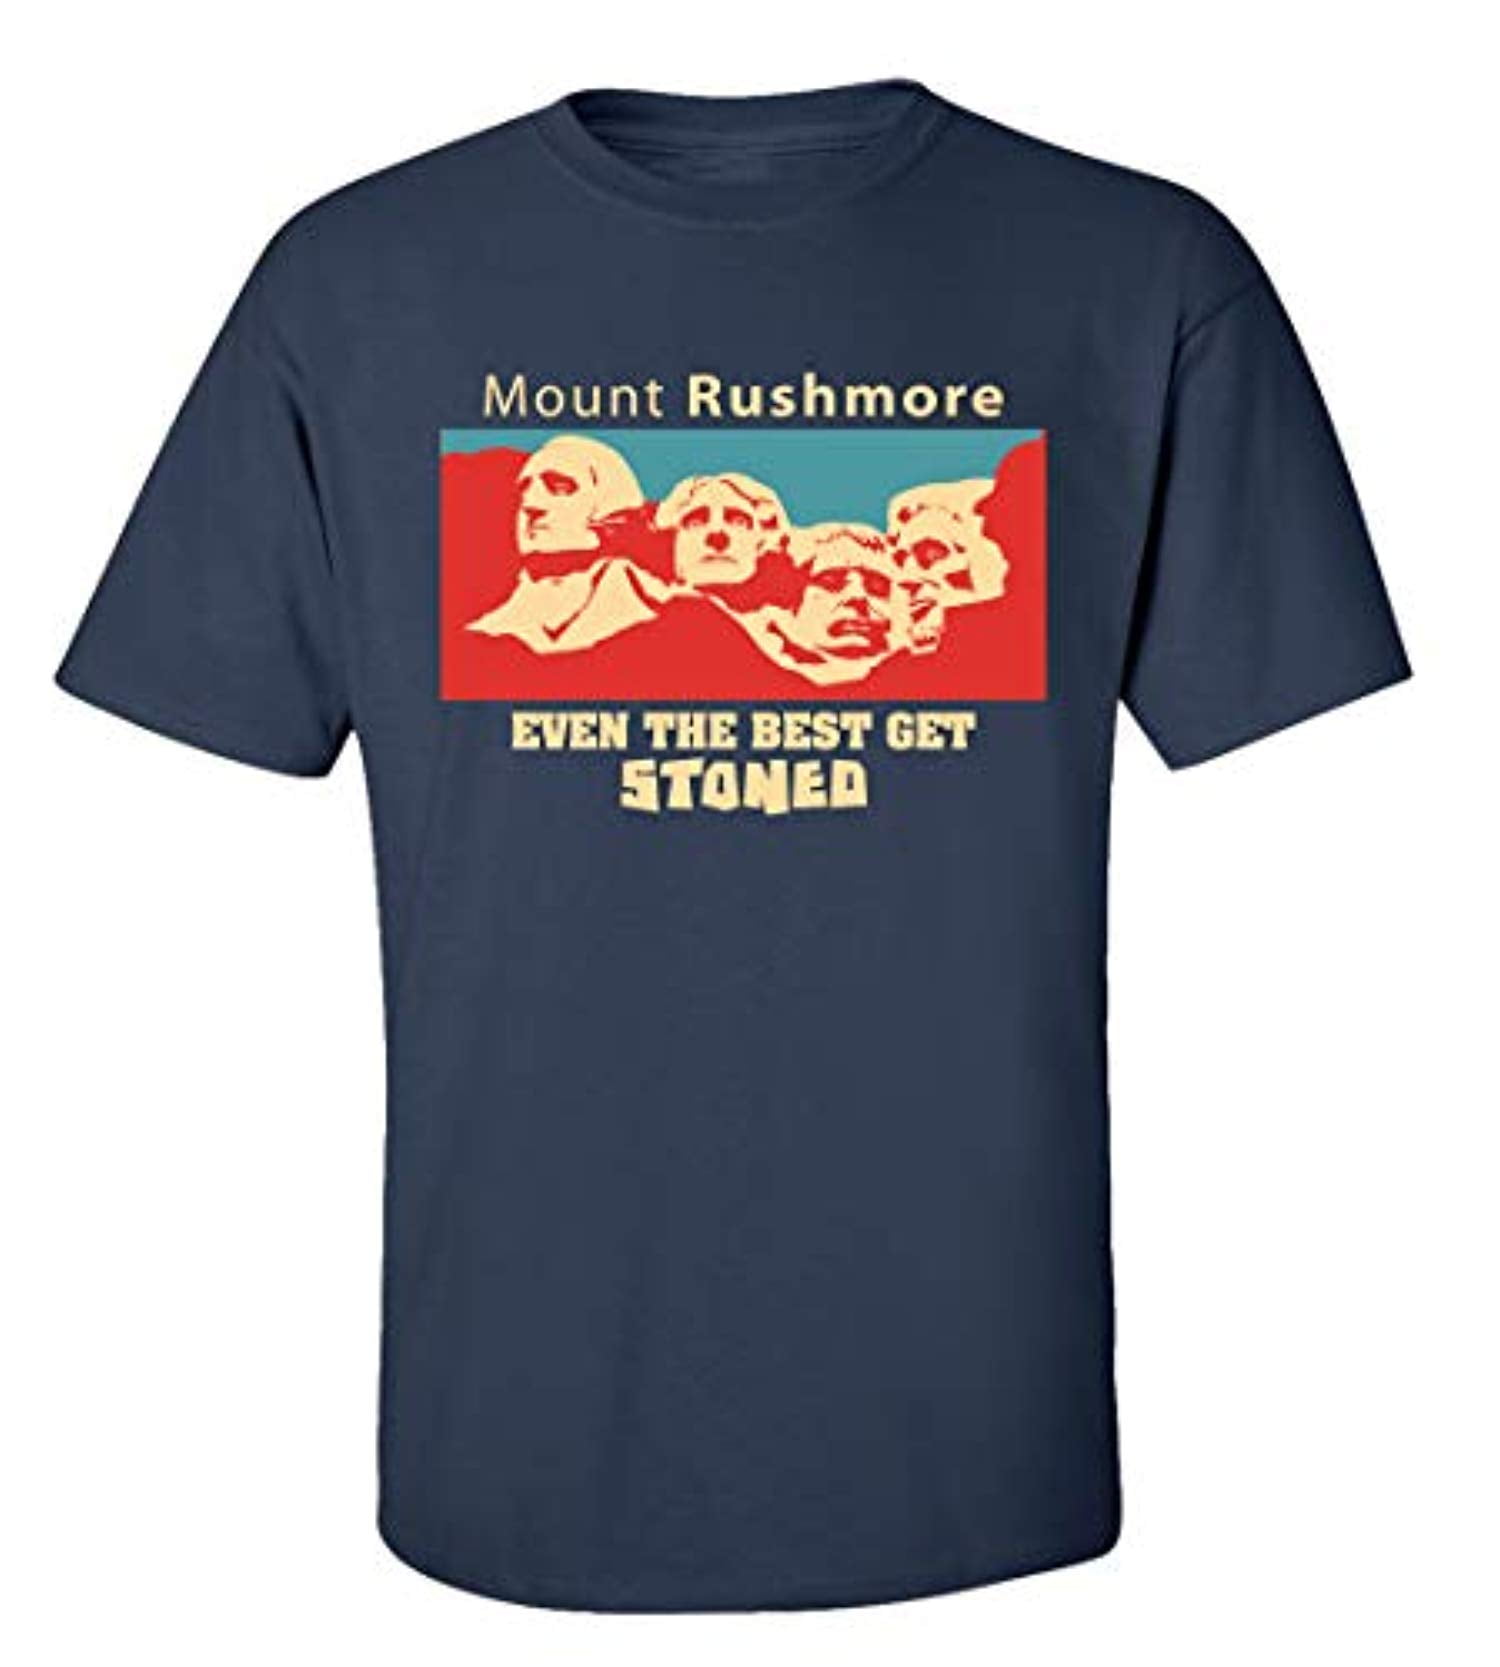 Funny Mount Rushmore Even The Best Get Stoned Adult Unisex Short Sleeve T- Shirt-Navy-4XL 